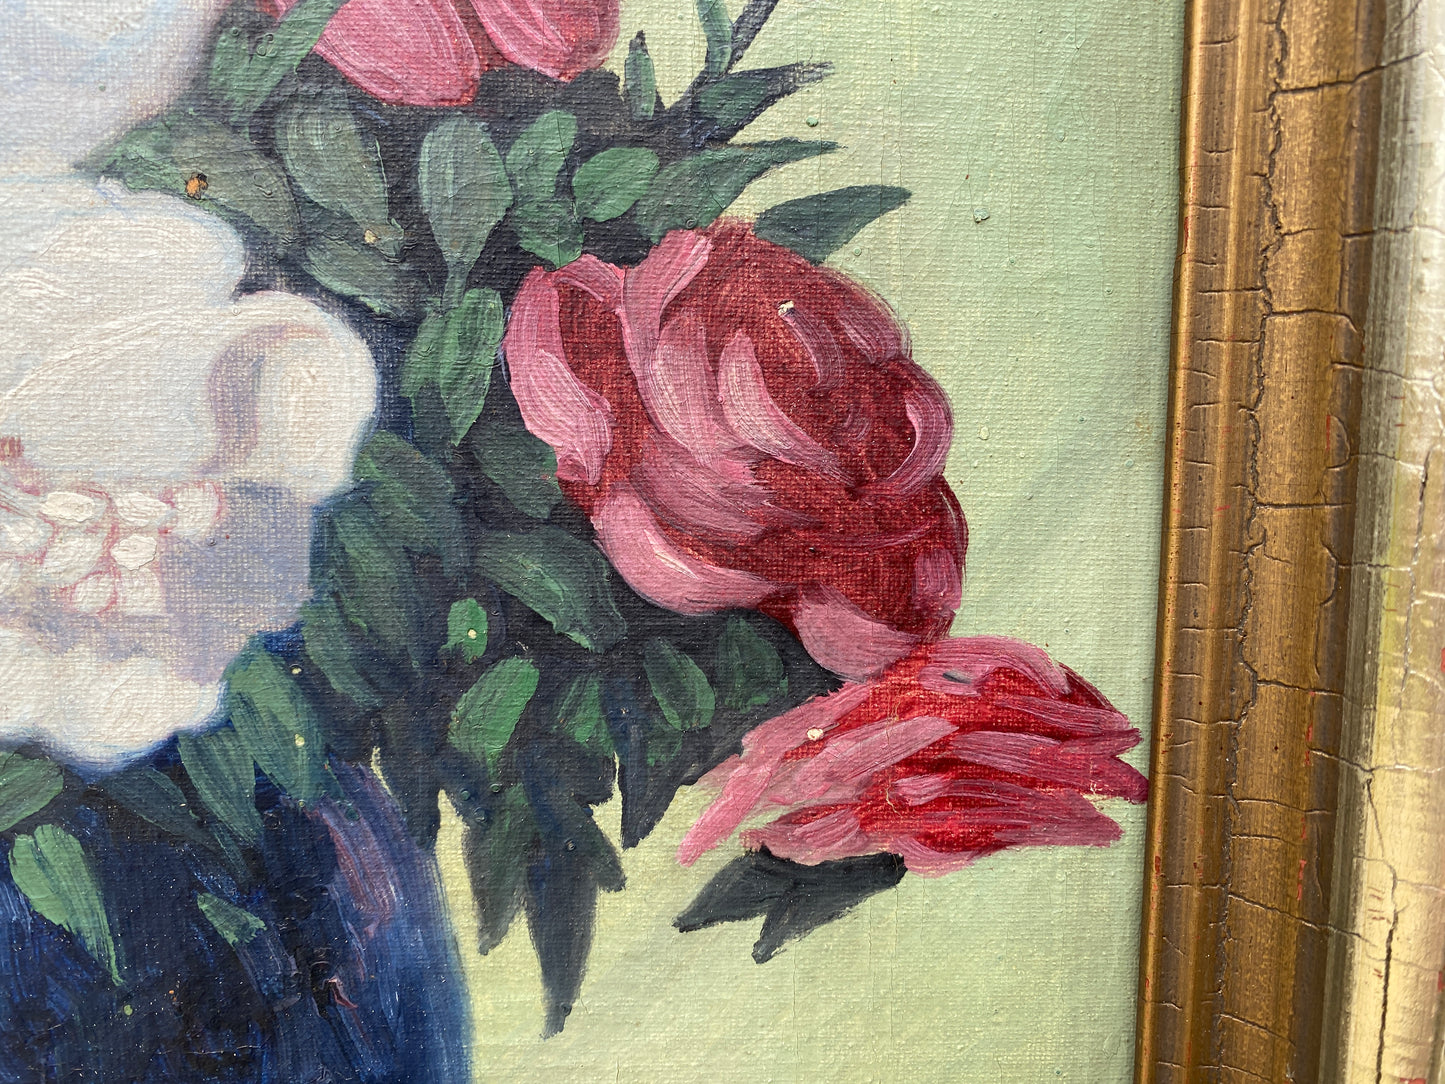 Impressionist Still Life Oil on Canvas 'Rose Bouquet' Early/Mid 20th Century